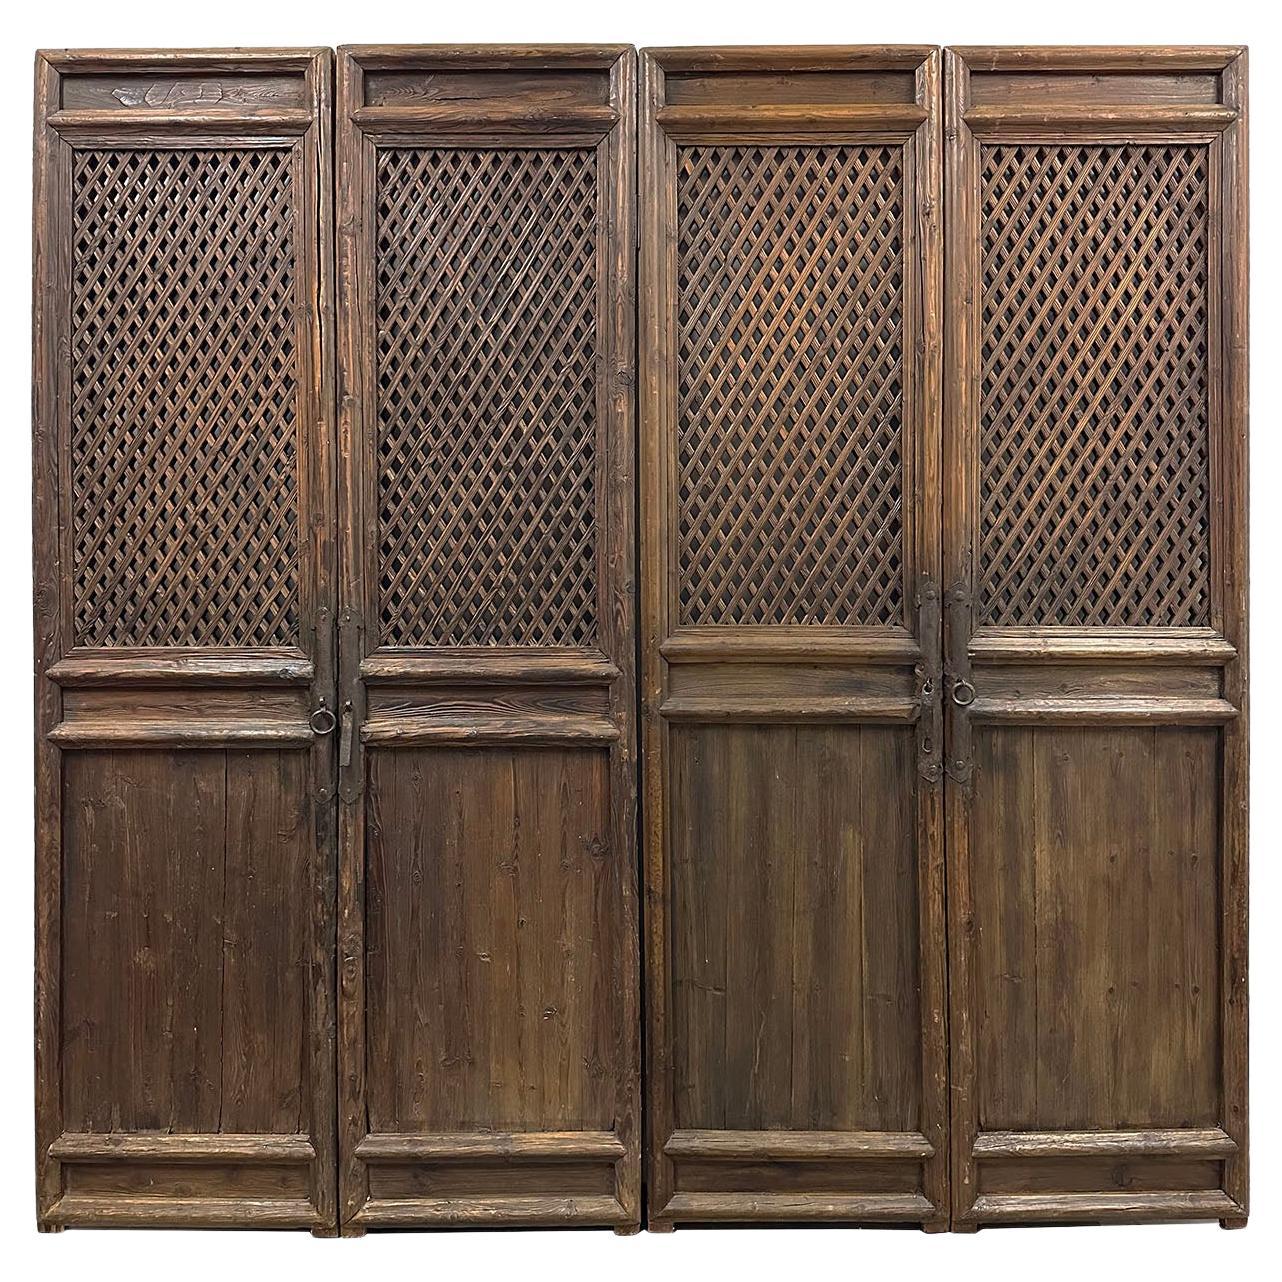 Late 19th Century Antique Chinese Hand Made 4 Panels Wooden Screen/Room Divider